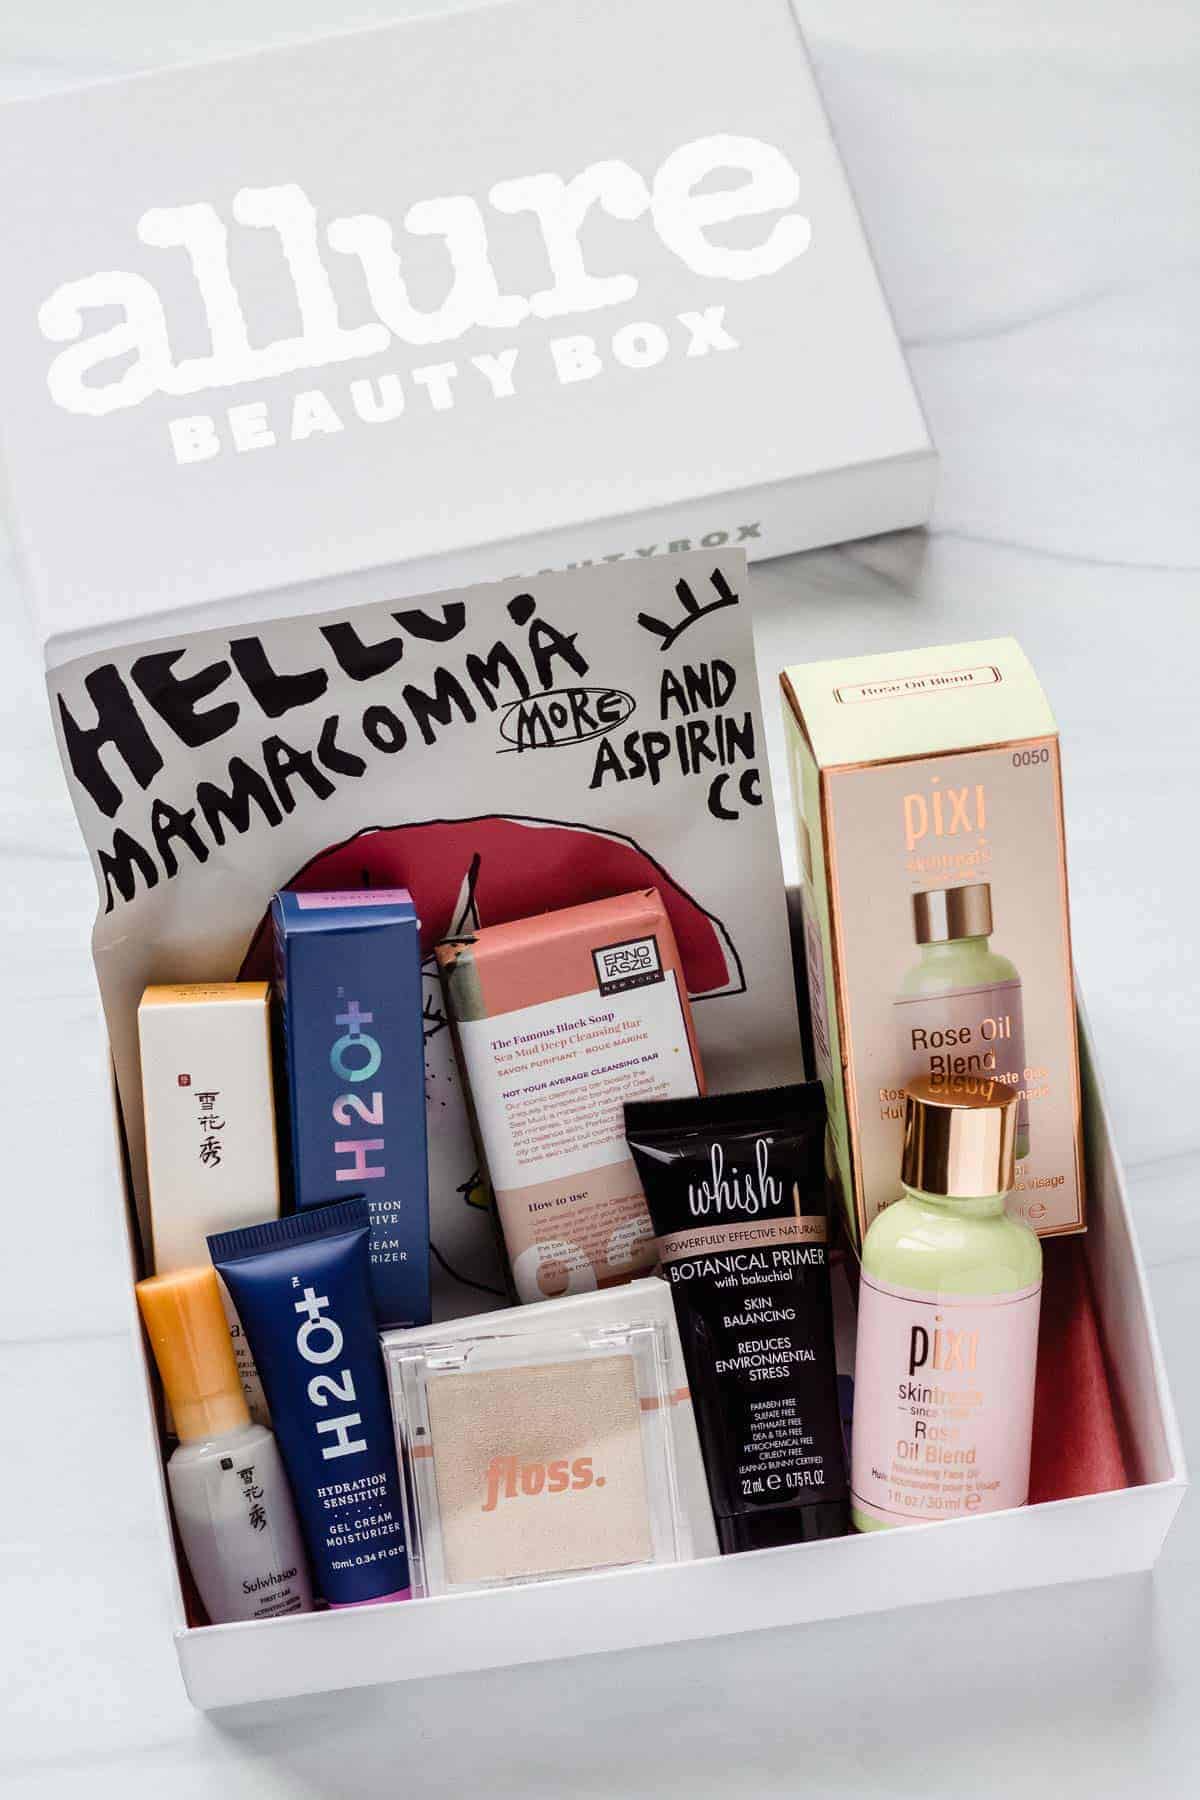 The August 2020 Allure Beauty Box opened with all of the items displayed inside